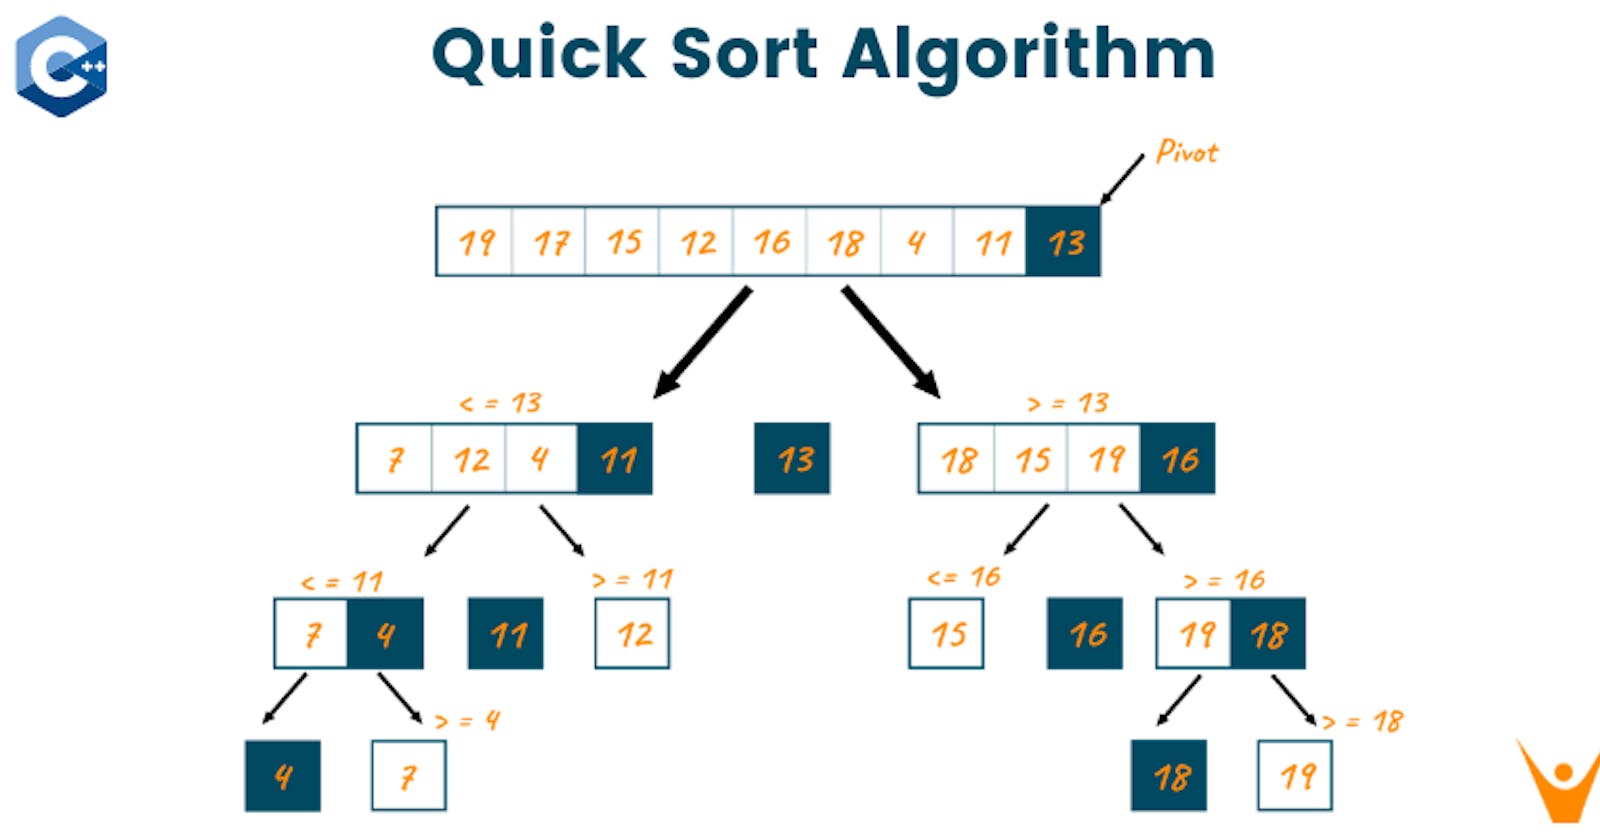 Understanding Quick Sort: A Divide and Conquer Sorting Algorithm